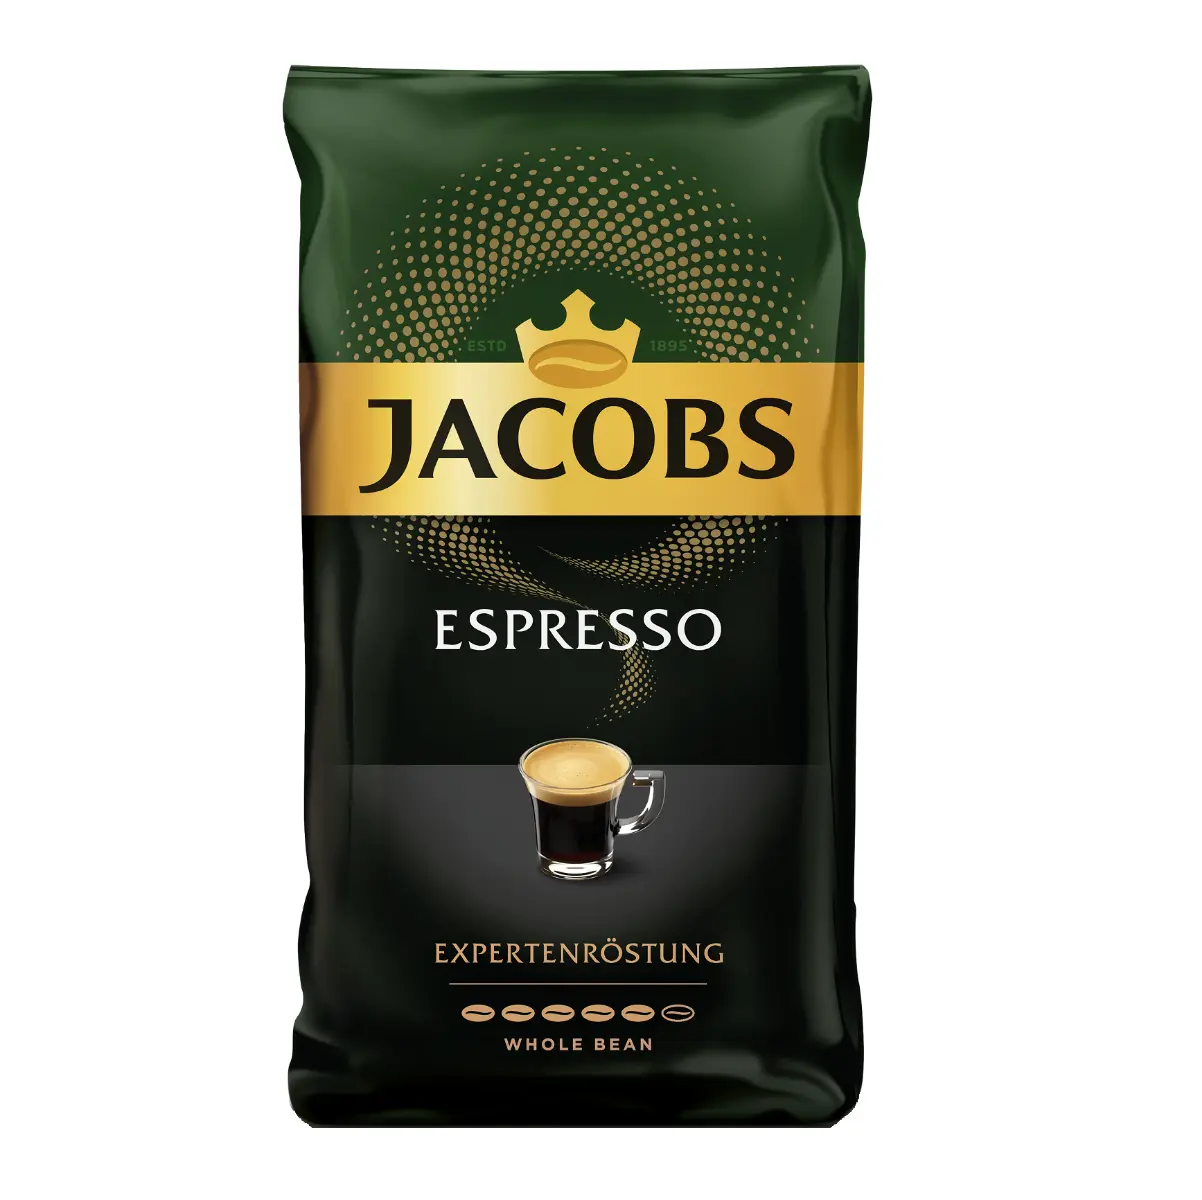 Cafea boabe Jacobs Expert Espresso, 1 kg